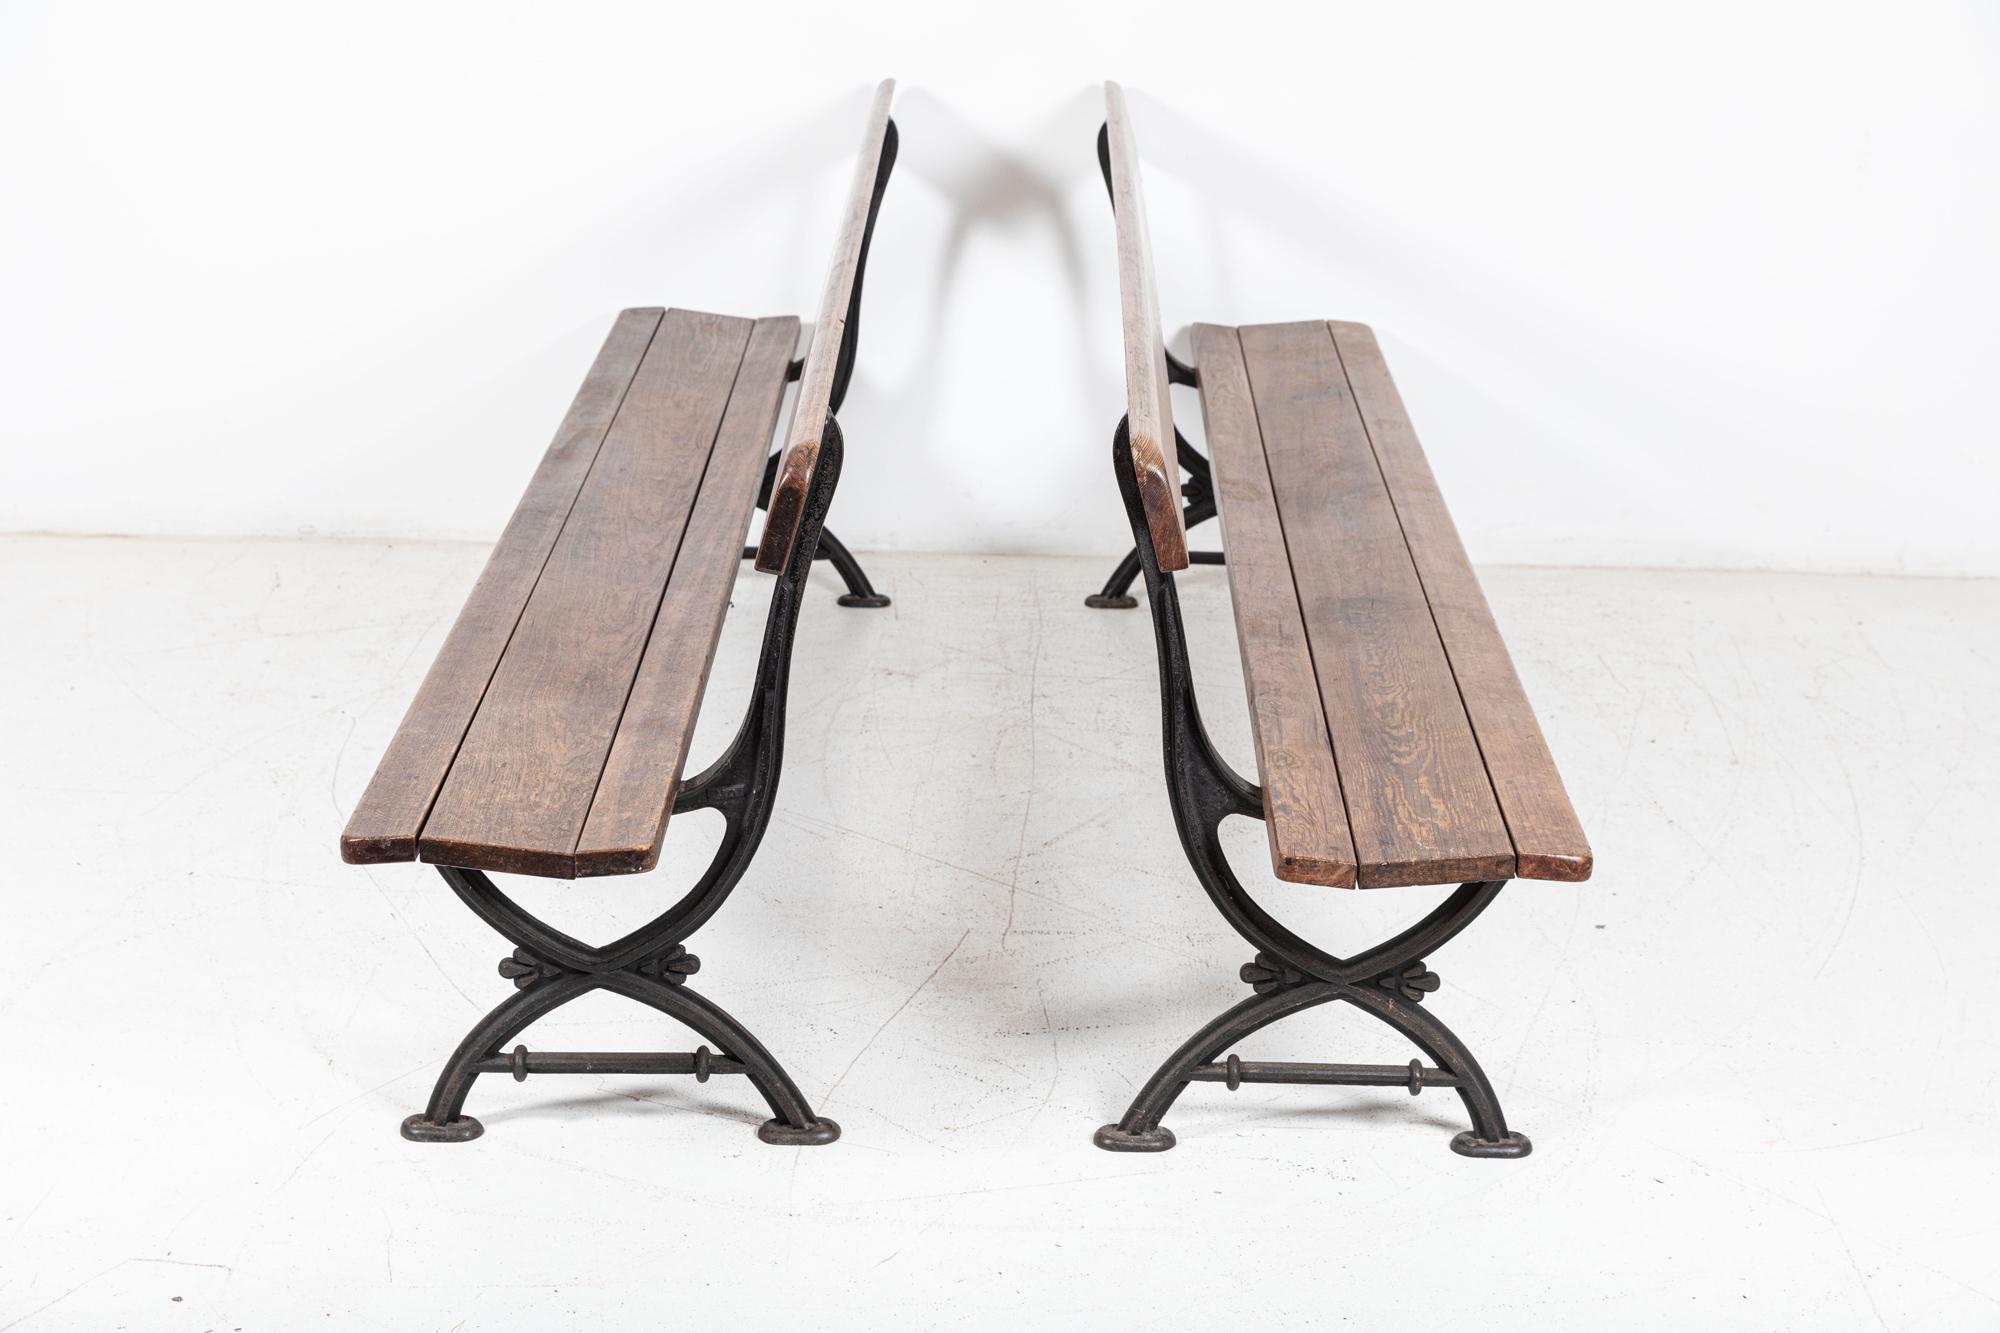 Circa 1880

Pair 19thC English Cast Iron Pitch pine Benches with London makers stamp (‘G.M & Hammer Co London’)

sku 884

Price for the pair

W244 x D48 x H84 cm

Seat Height 40cm